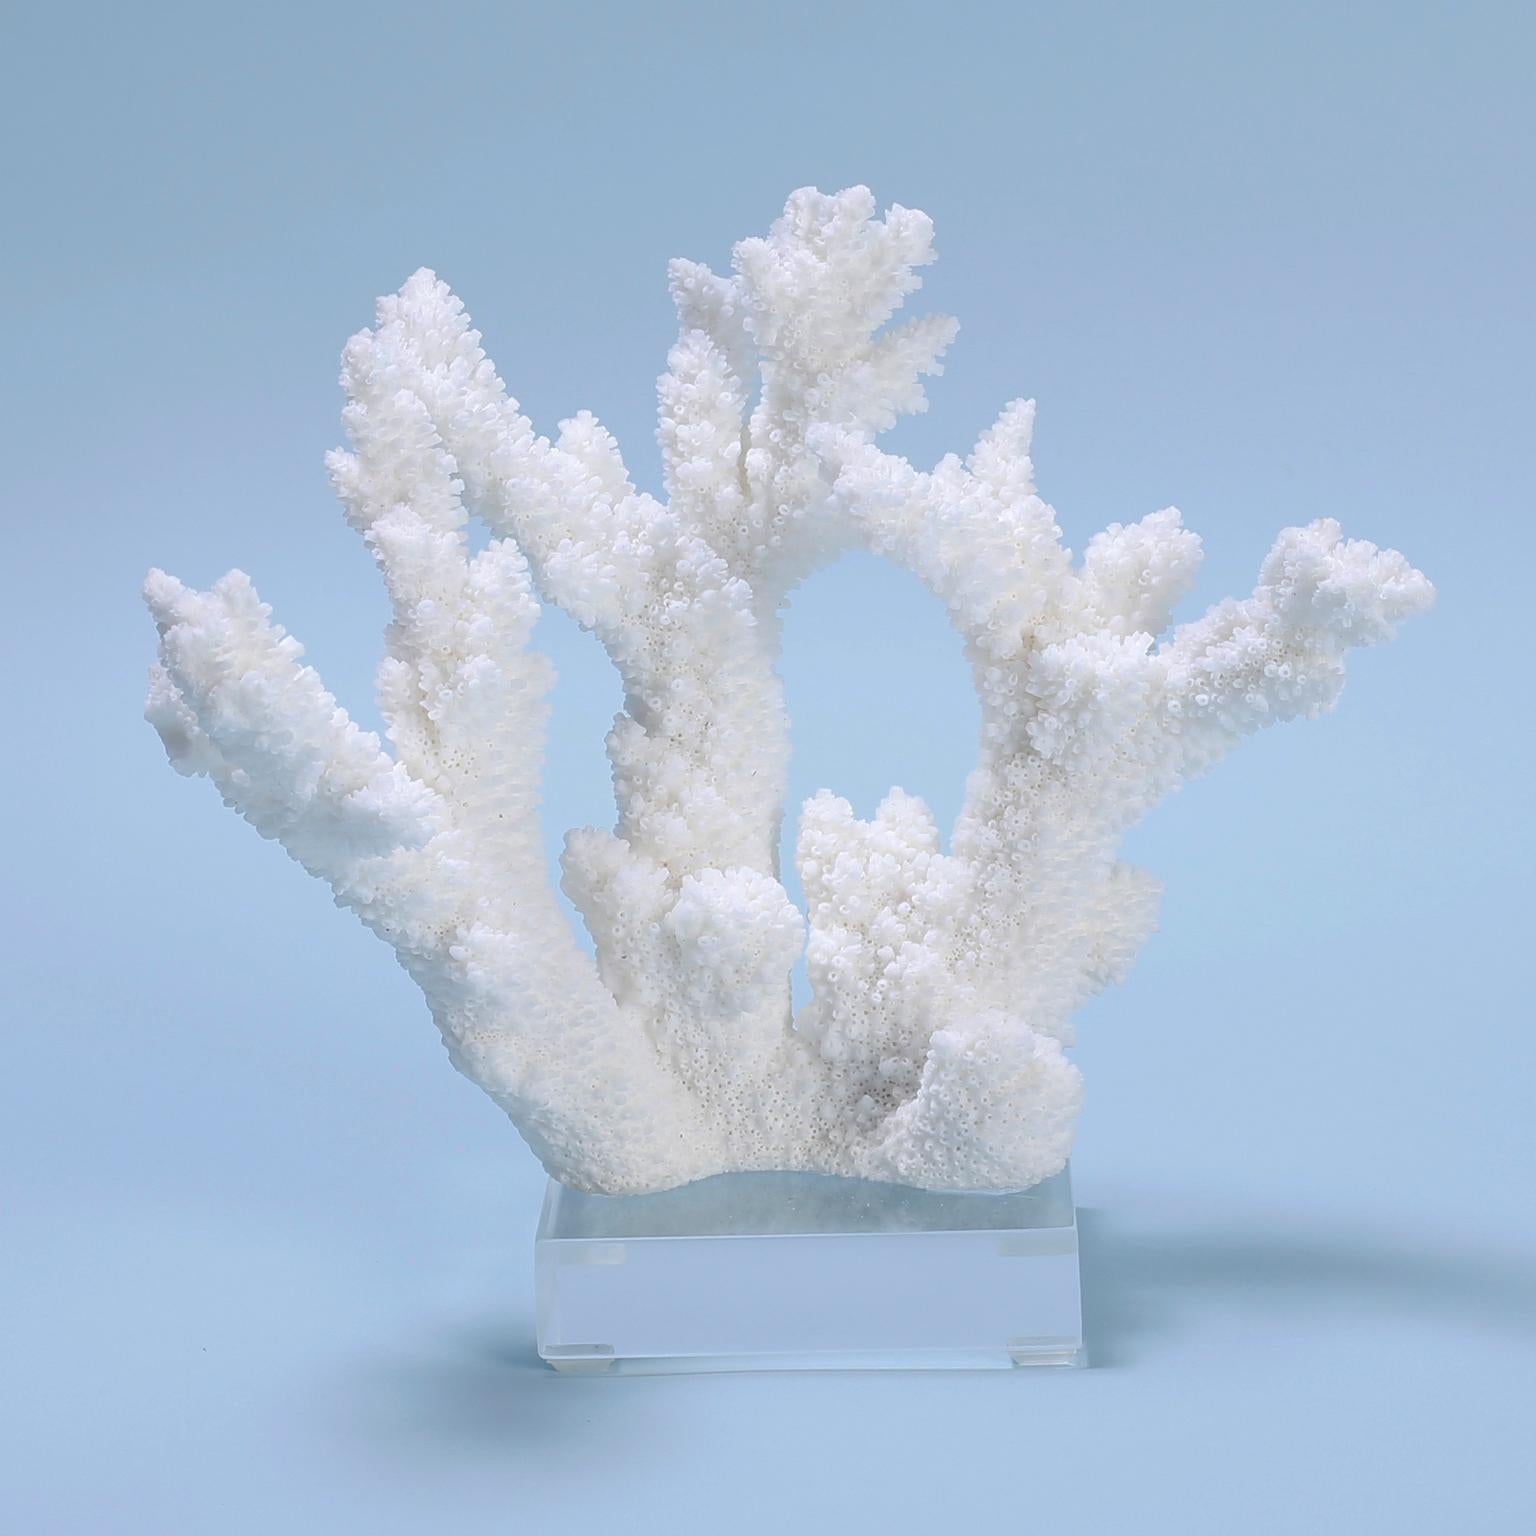 Here we have branch coral, bird’s nest coral (SOLD), and Pacific Elkhorn coral in their natural form, gloriously displayed on Lucite bases, adding a bright and chic presence to any interior. Priced individually. 

Available only in the United States